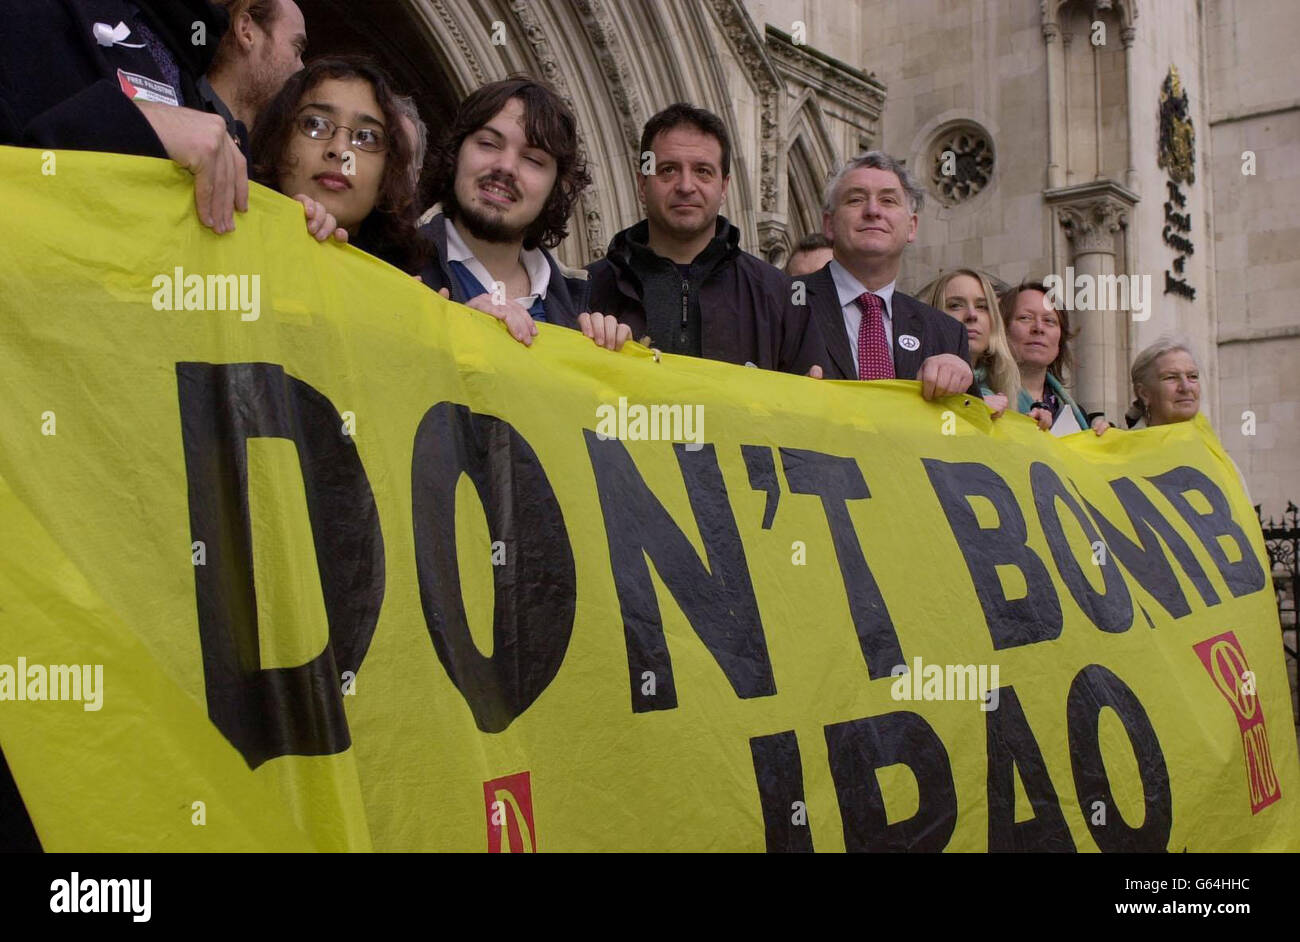 Comedian and CND supporter Mark Thomas (centre) joins a group of fellow protesters outside the Royal Courts of Justice in central London, as lawyers for the peace campaign group launch a legal bid to block any action against Iraq by the UK. * The group is seeking an urgent ruling that no action can lawfully be taken against the country without the UN Security Council first passing a fresh resolution clearly authorising the use of force. Stock Photo